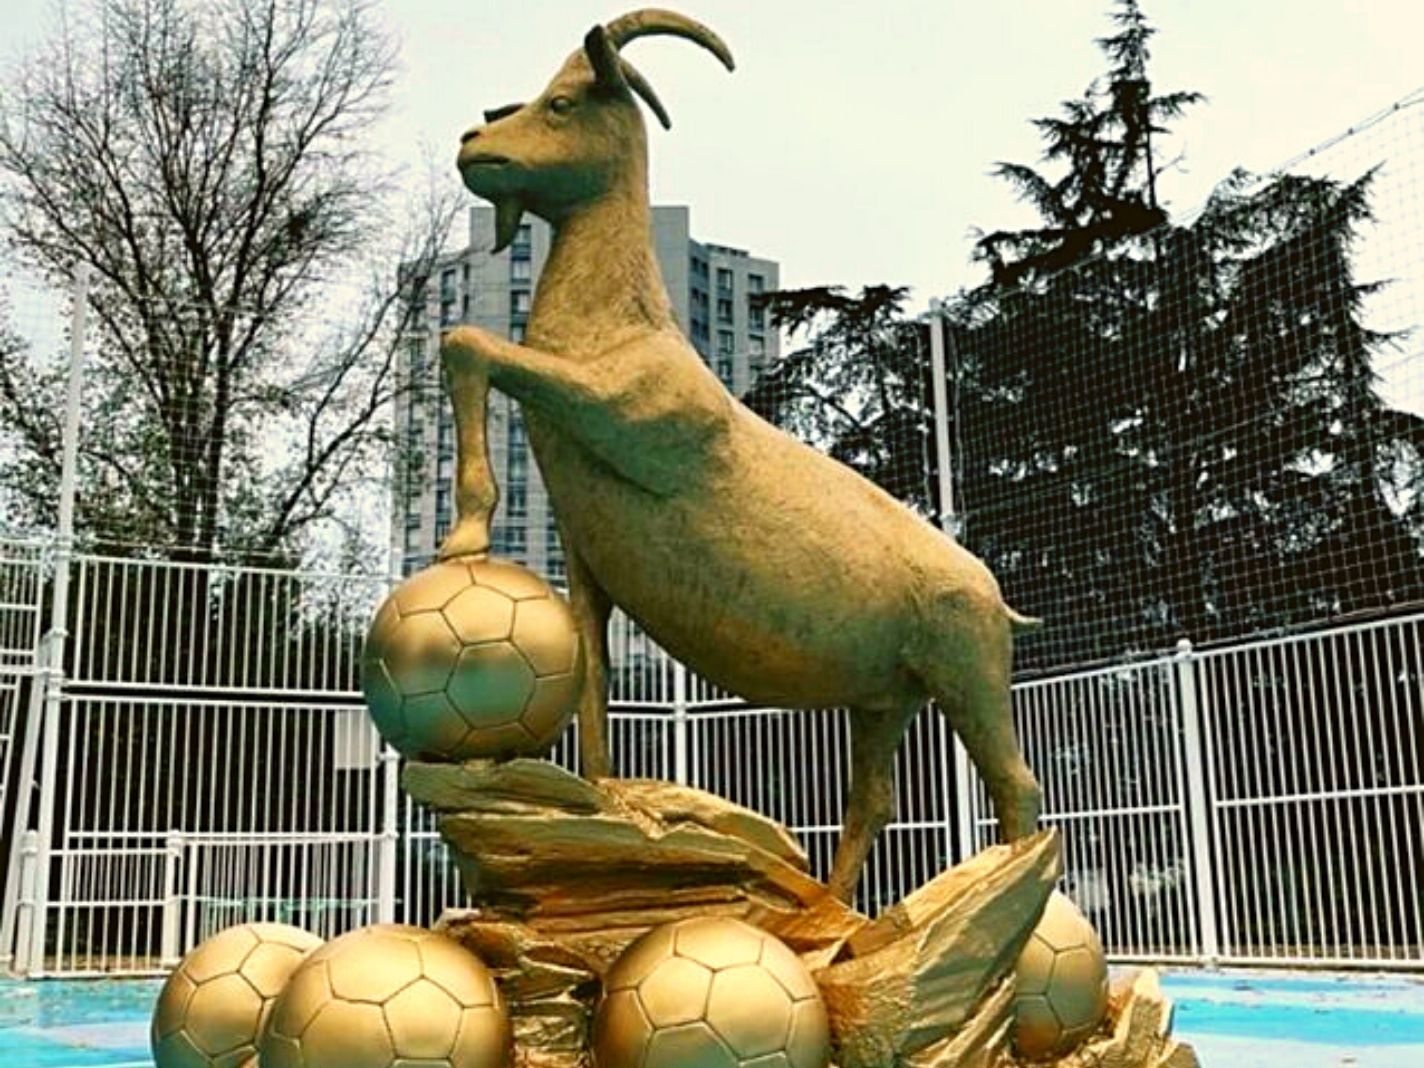 A goat statue placed in front of Eiffel Tower in honour of Lionel Messi winning Ballon d'Or